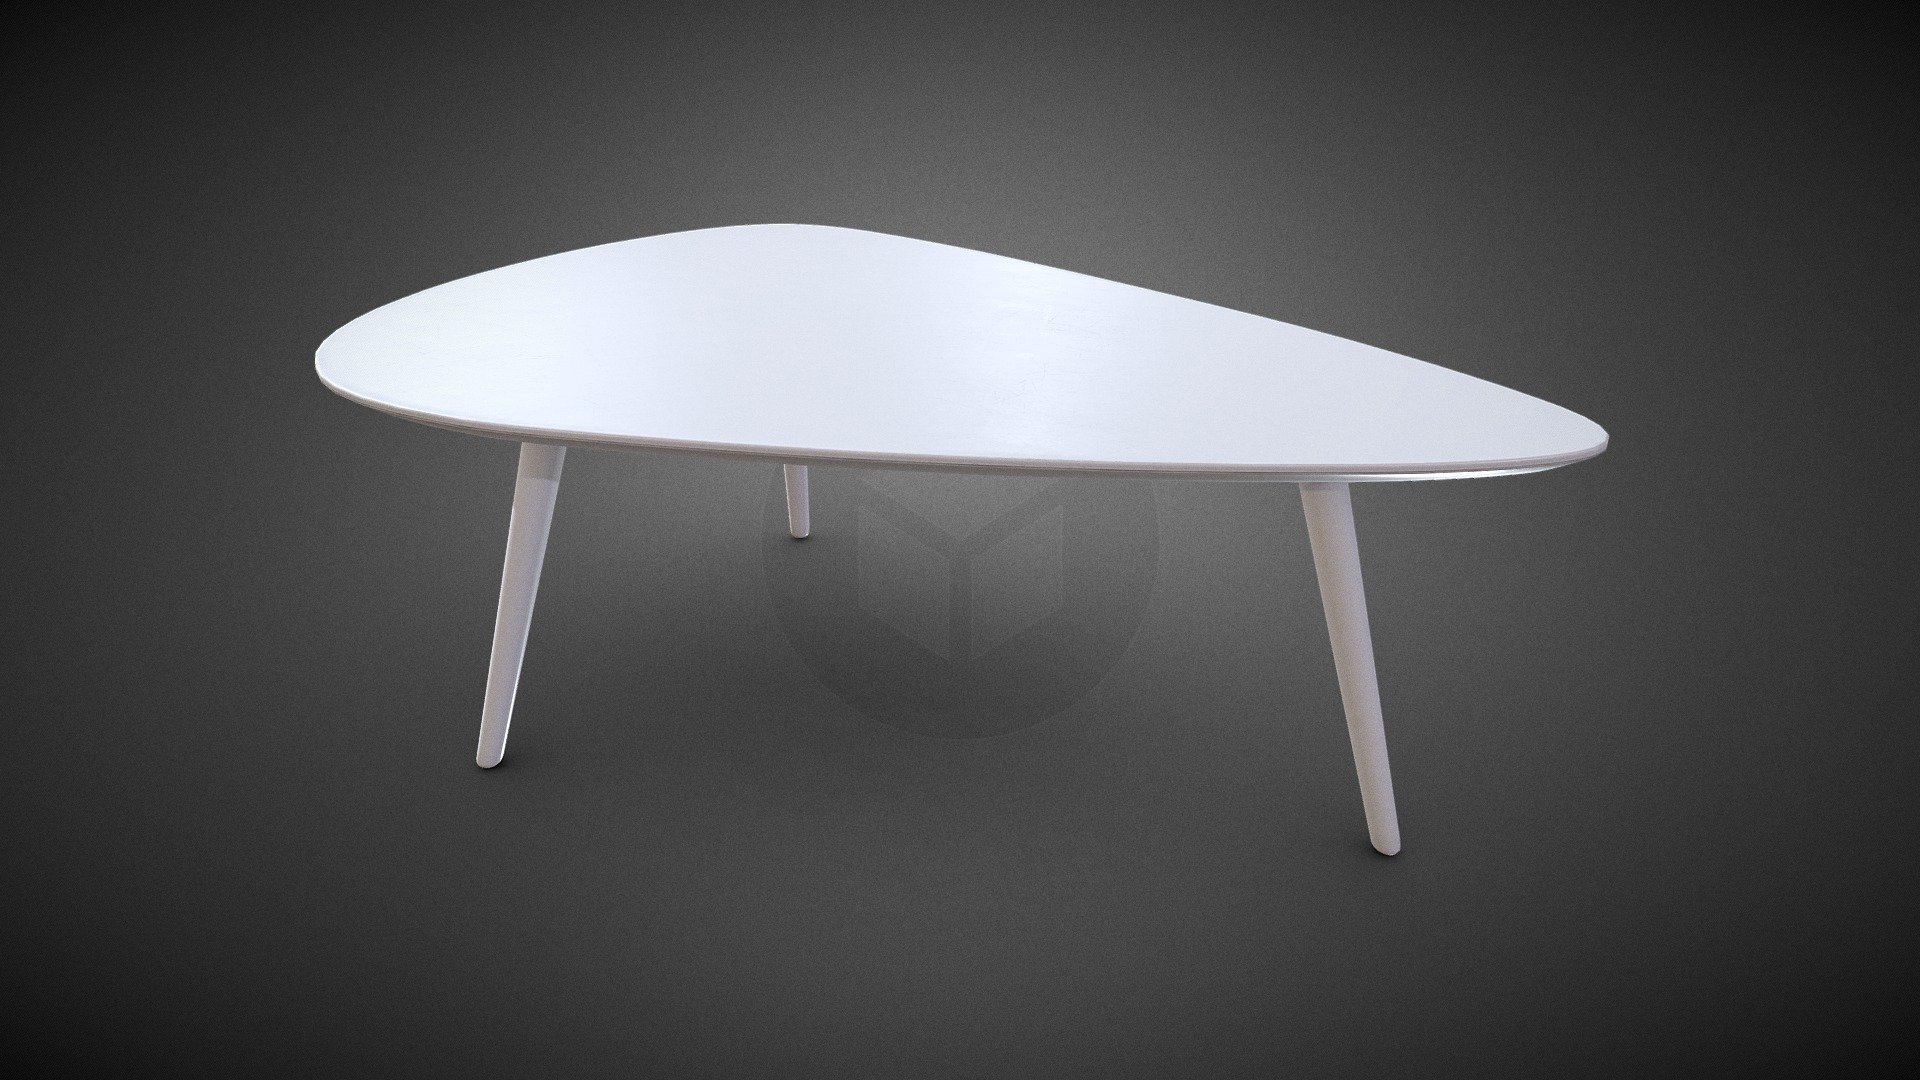 3D models of a coffee table.

3D Models:

Formats included : .FBX .OBJ

Textures:

Created with Substance Painter.

1*4K 8-bit PNG format.

PBR Metal/Roughness standard 3d model